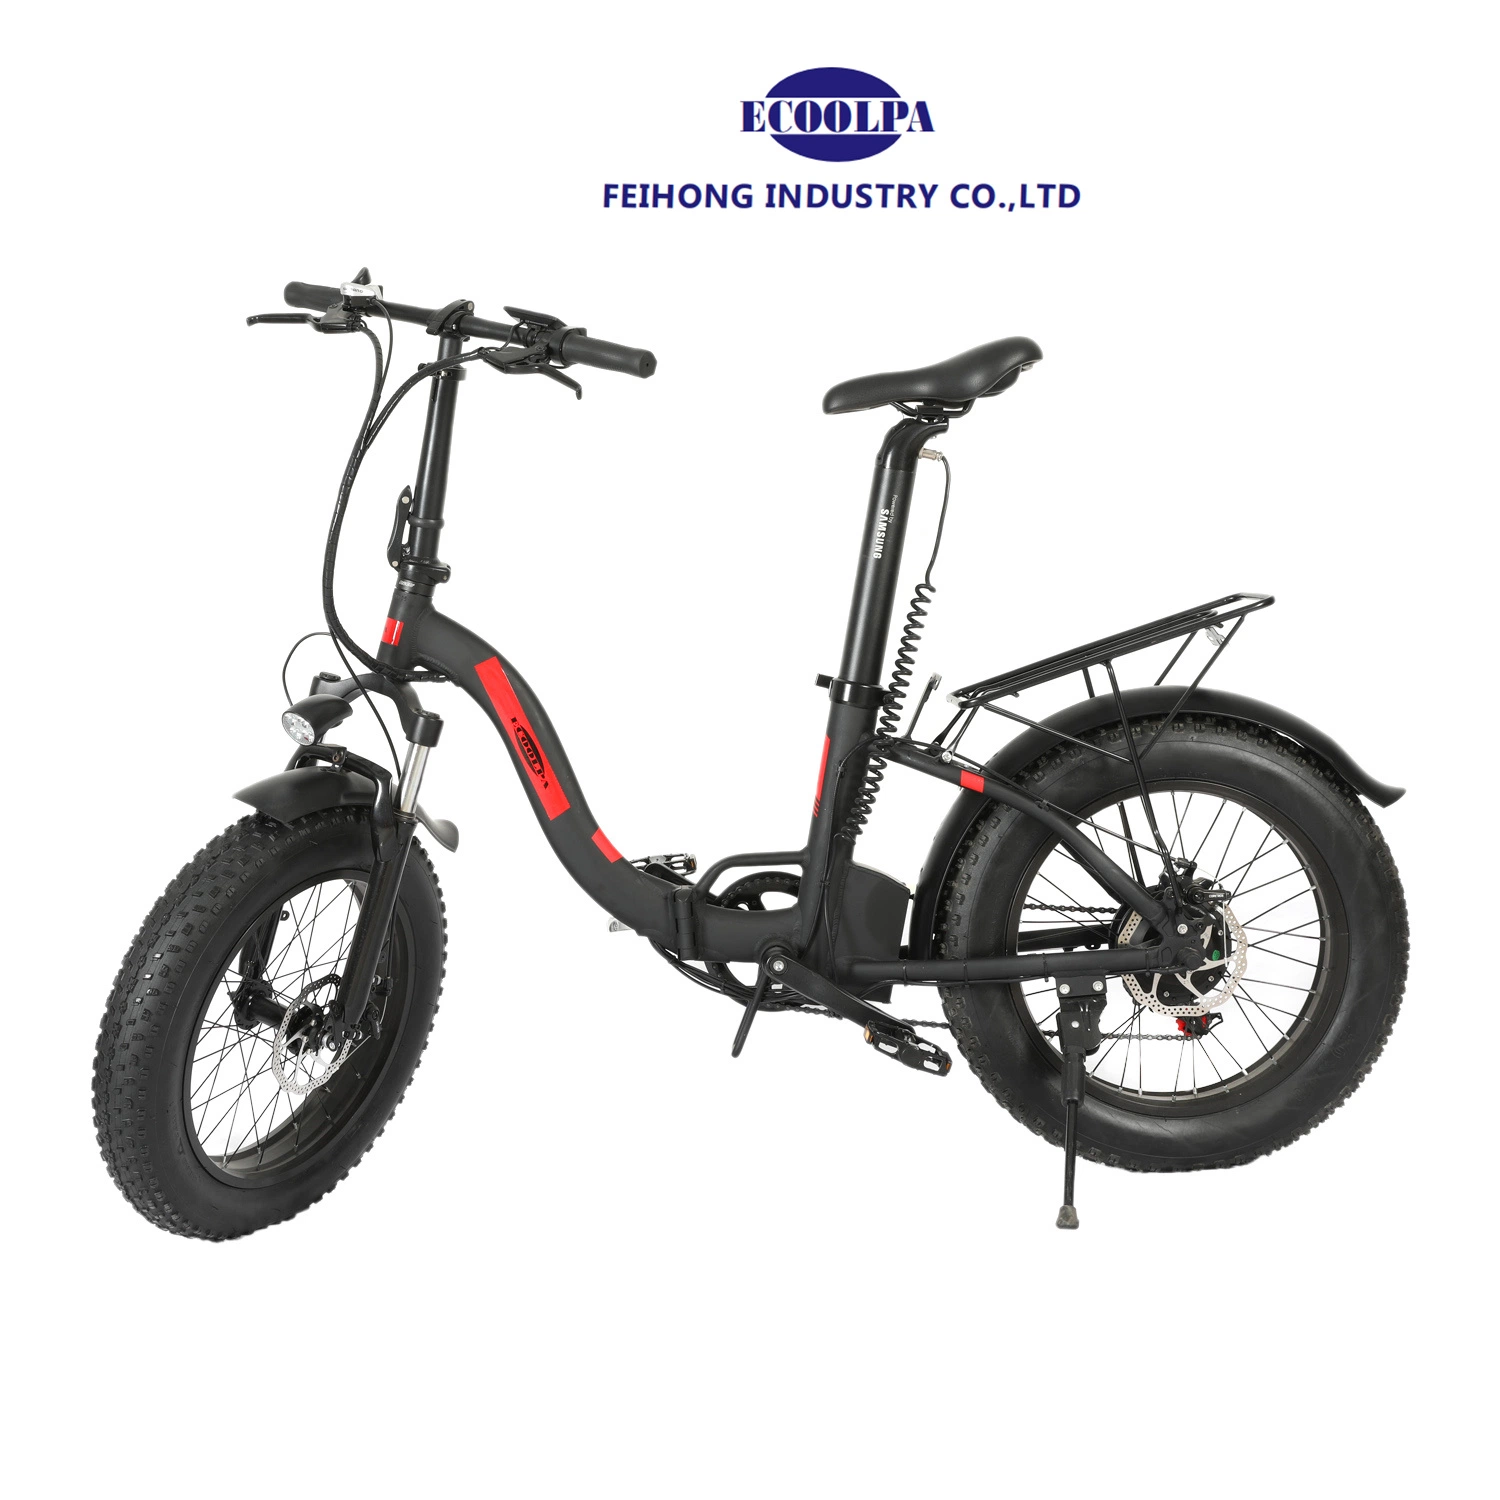 20inch Motorcycle Electric Scooter Bicycle Electric Bike Electric Motorcycle Scooter Motor Scooter Battery 48V 500W Motor Shimano Speed 21